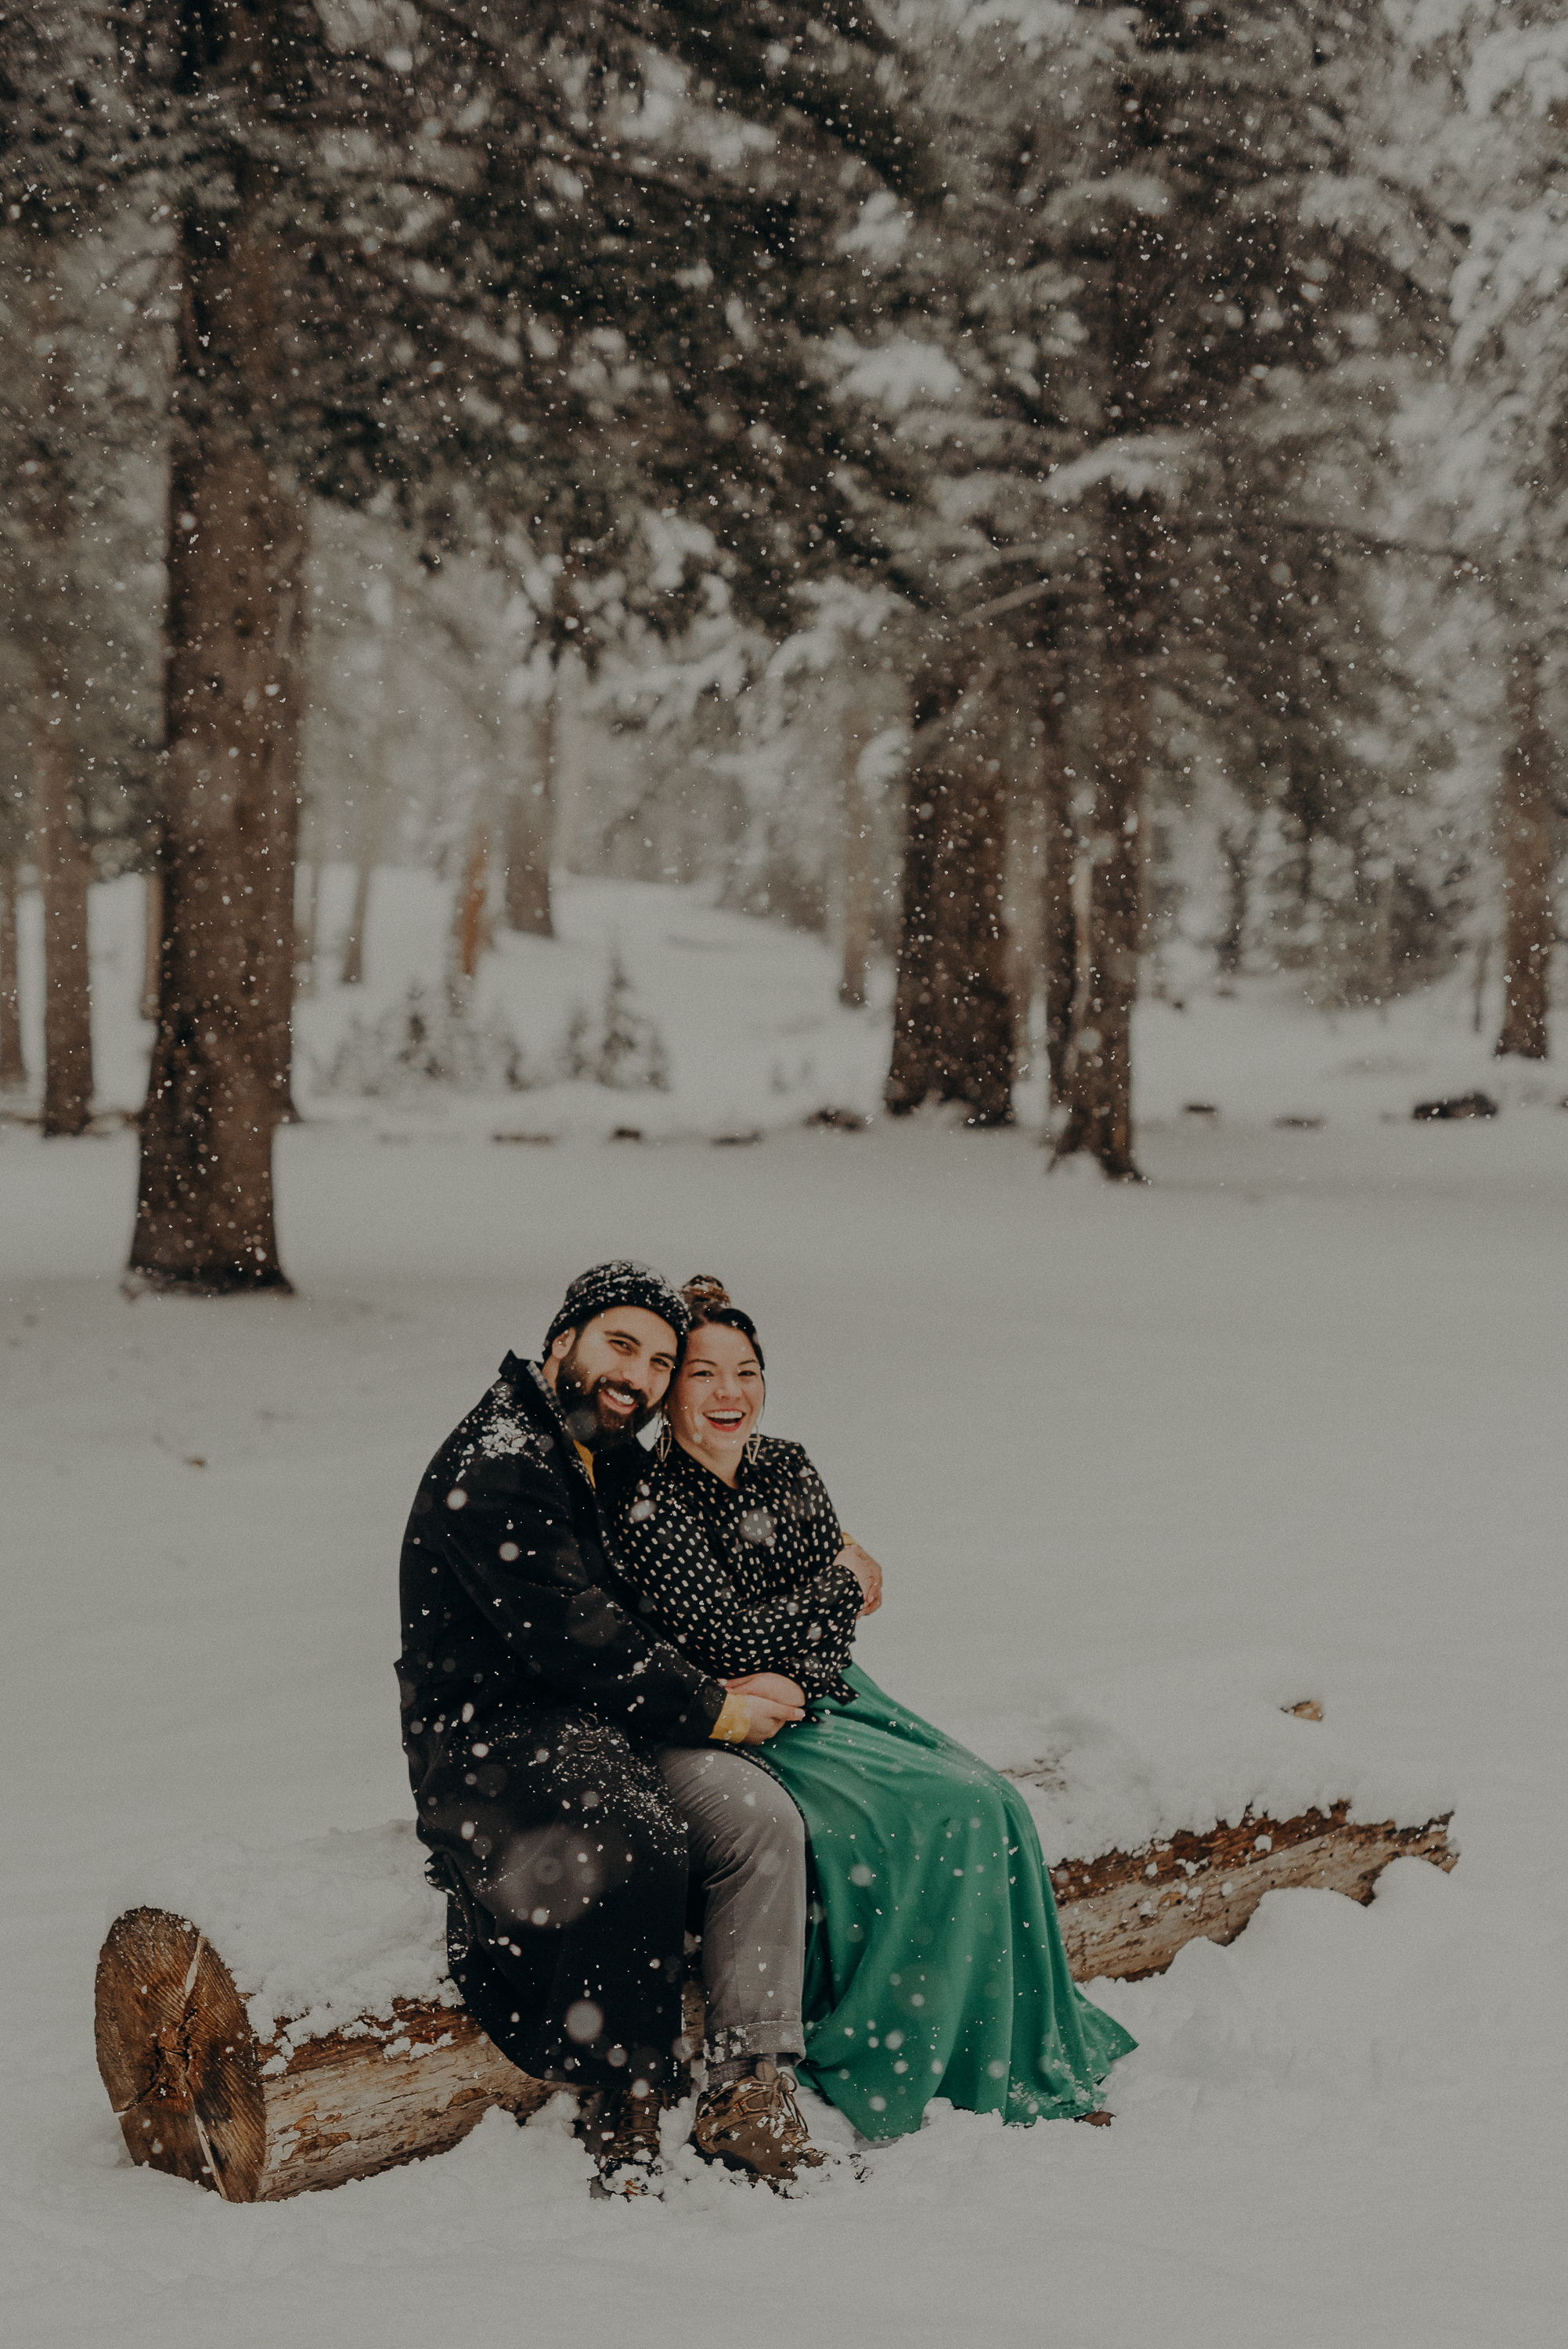 ©Isaiah + Taylor Photography - Los Angeles Wedding Photographer - Snowing engagement session-022.jpg